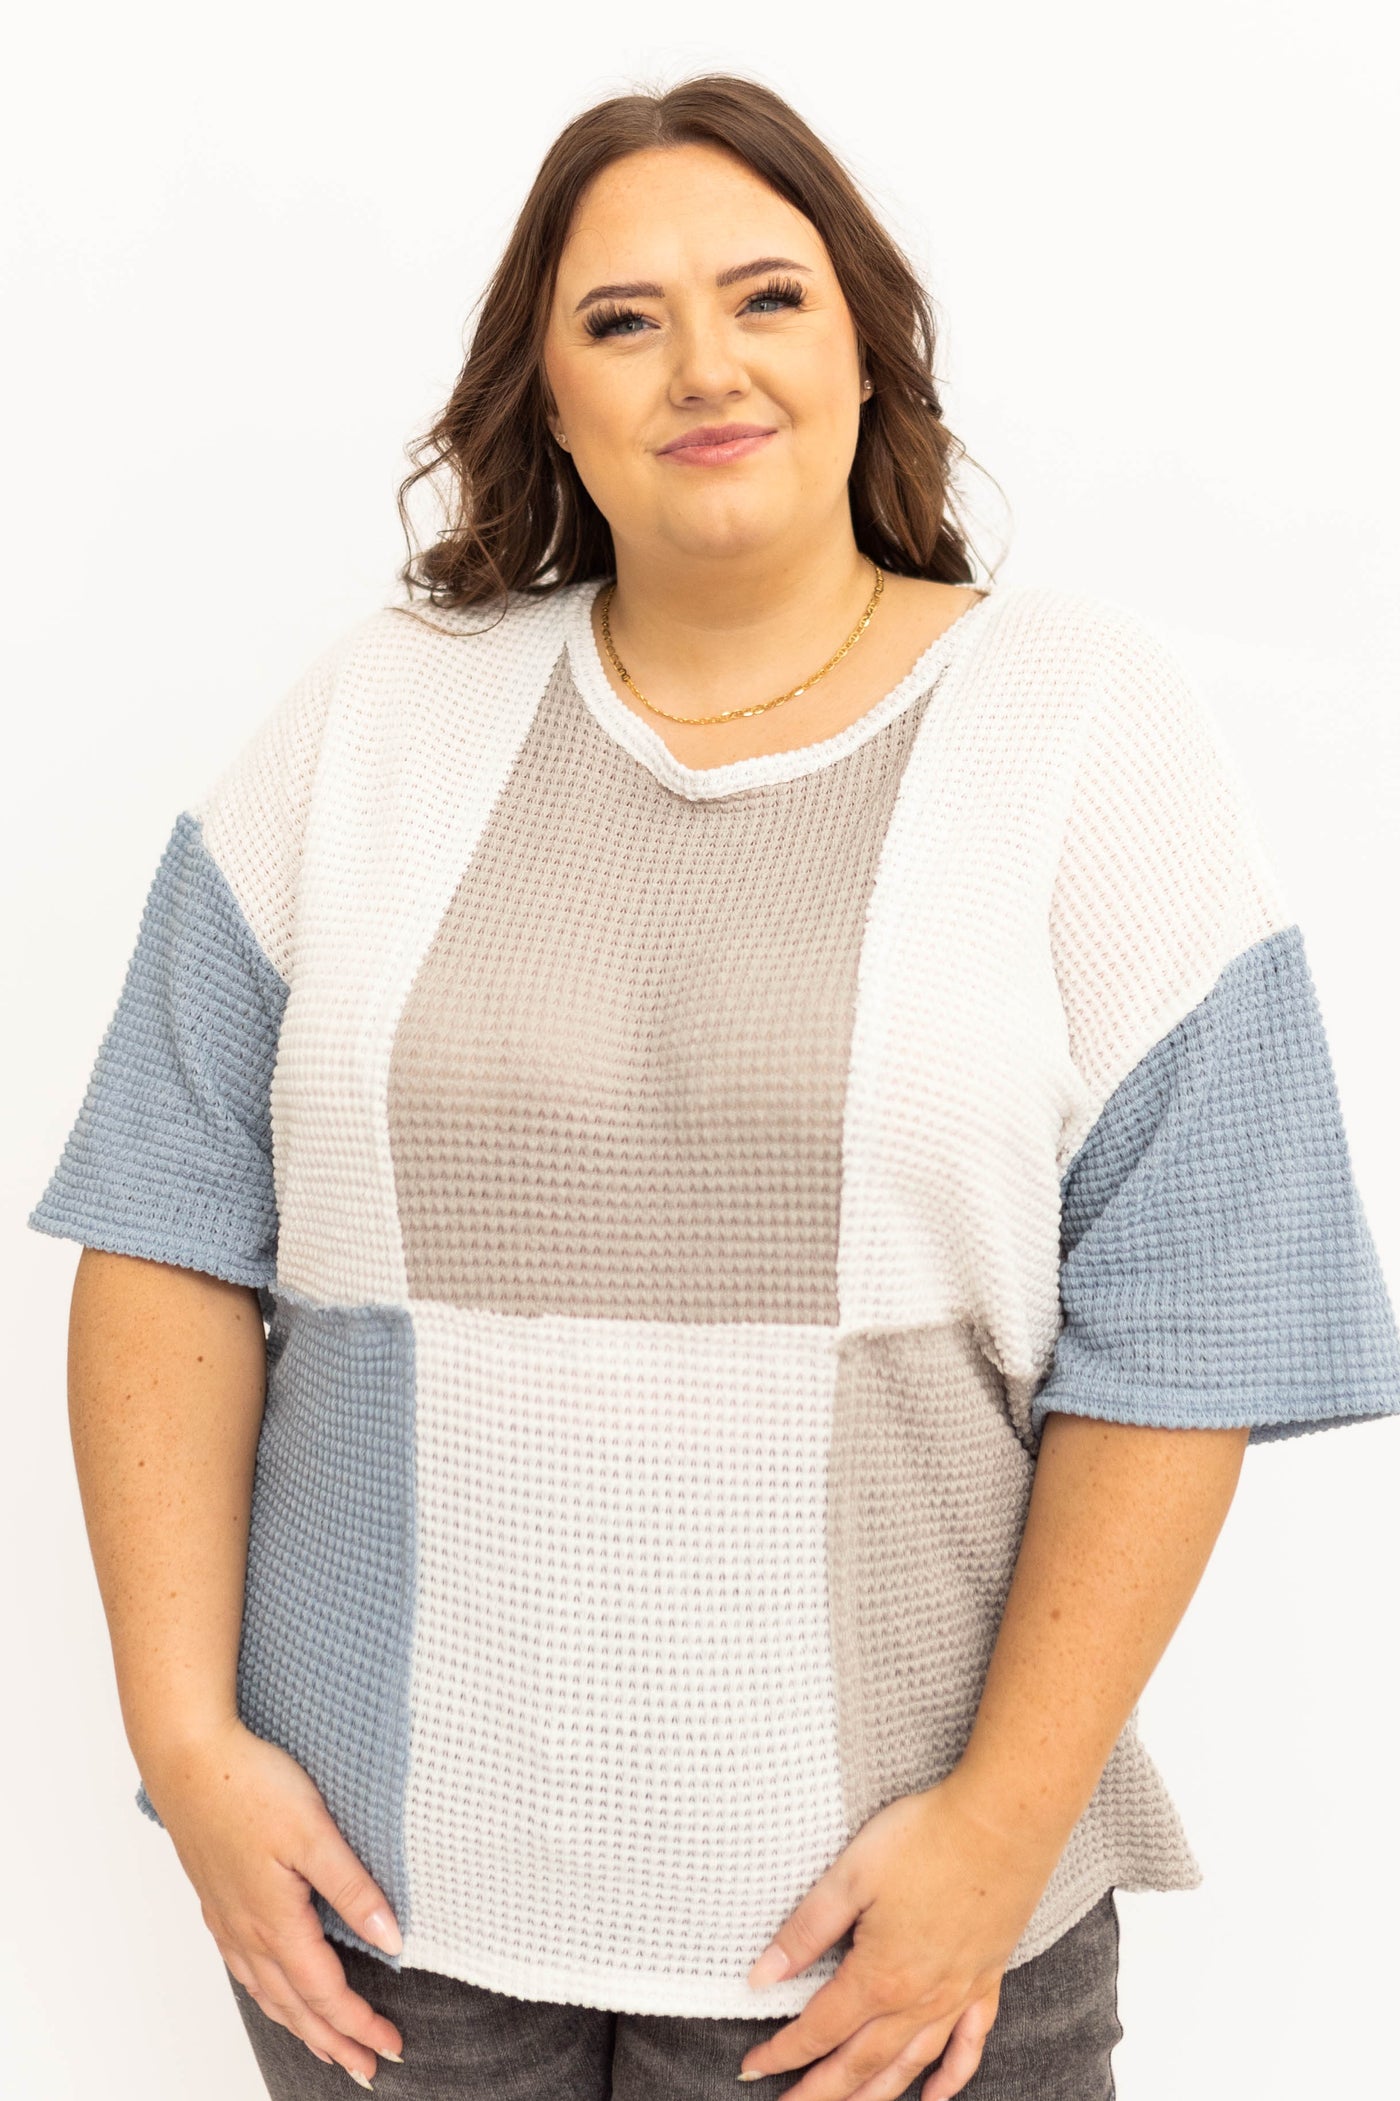 Plus size blue knit top with tan squares